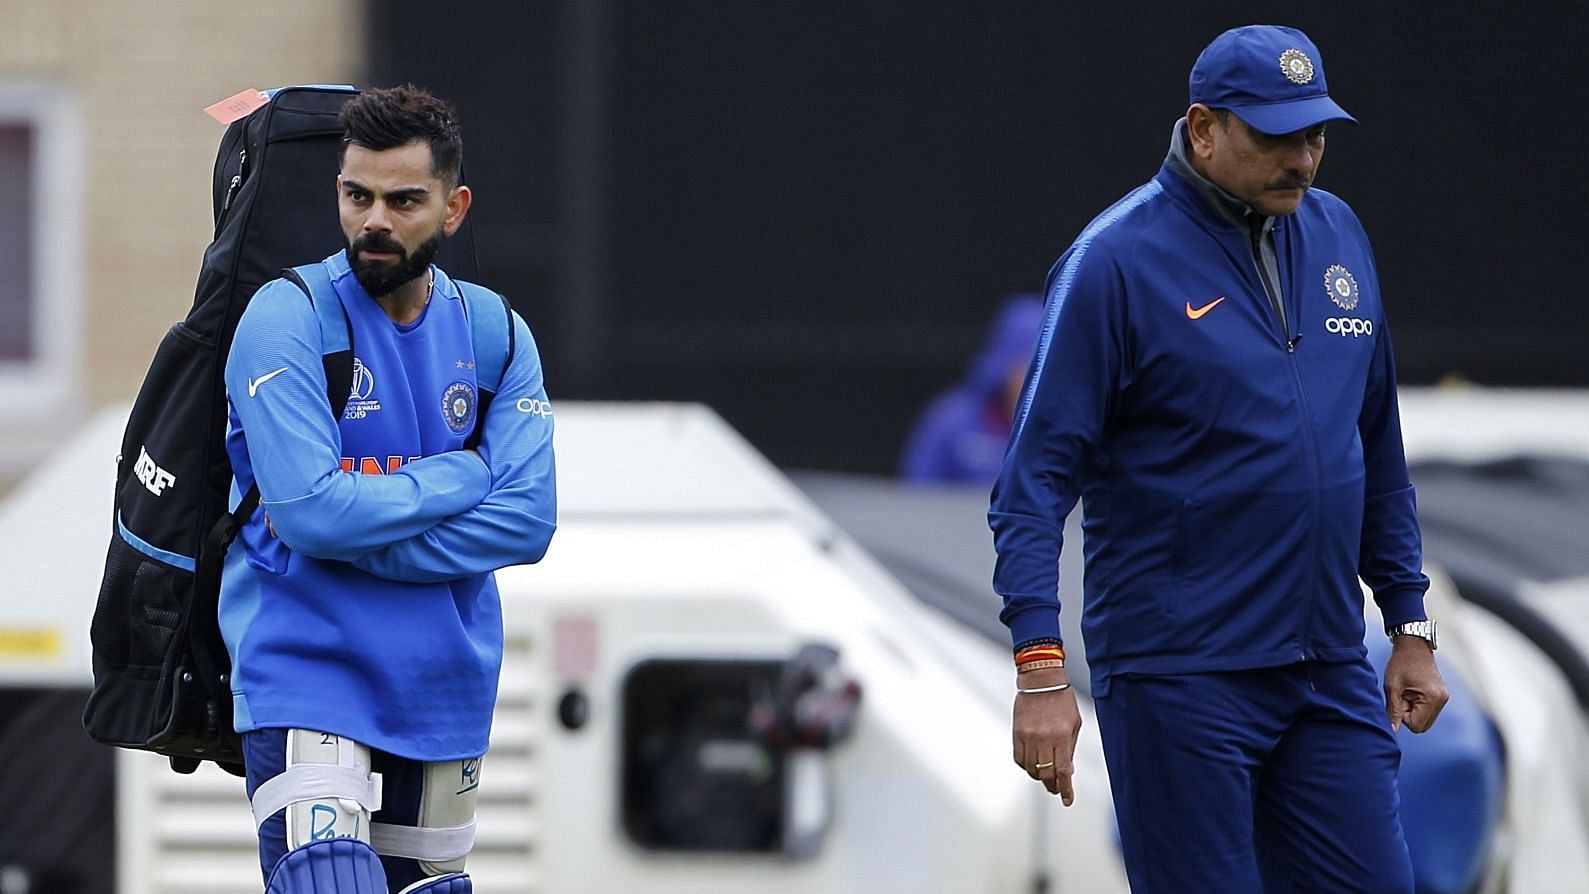 New Coach of Indian Cricket Team: According to reports, India captain Virat Kohli will not have a say in who will replace Ravi Shastri as Team India’s coach.